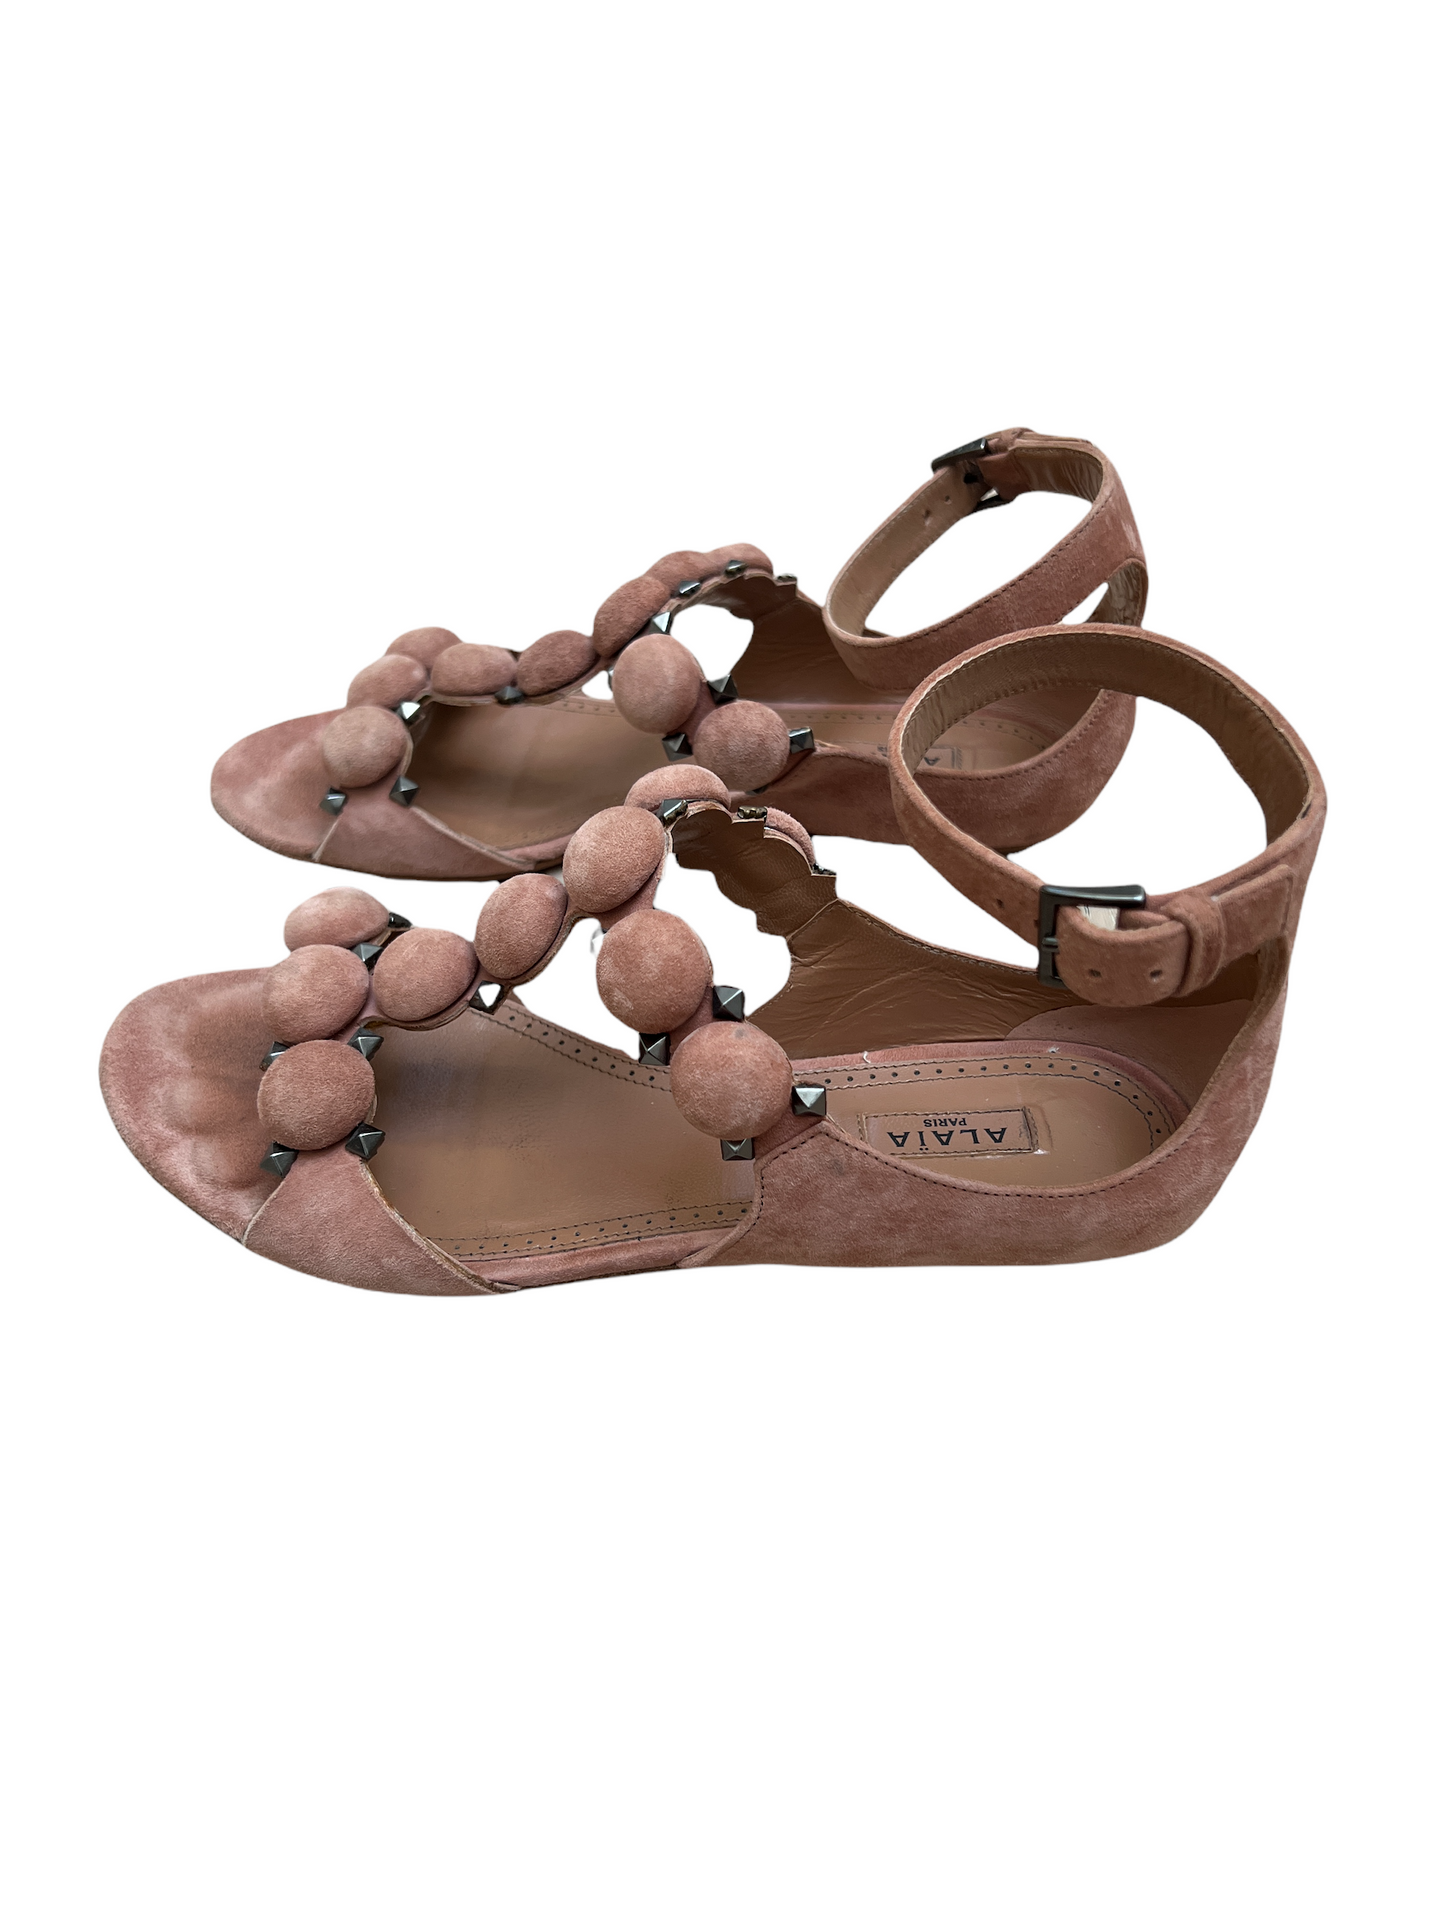 Suede Bombe Sandals - 6.5